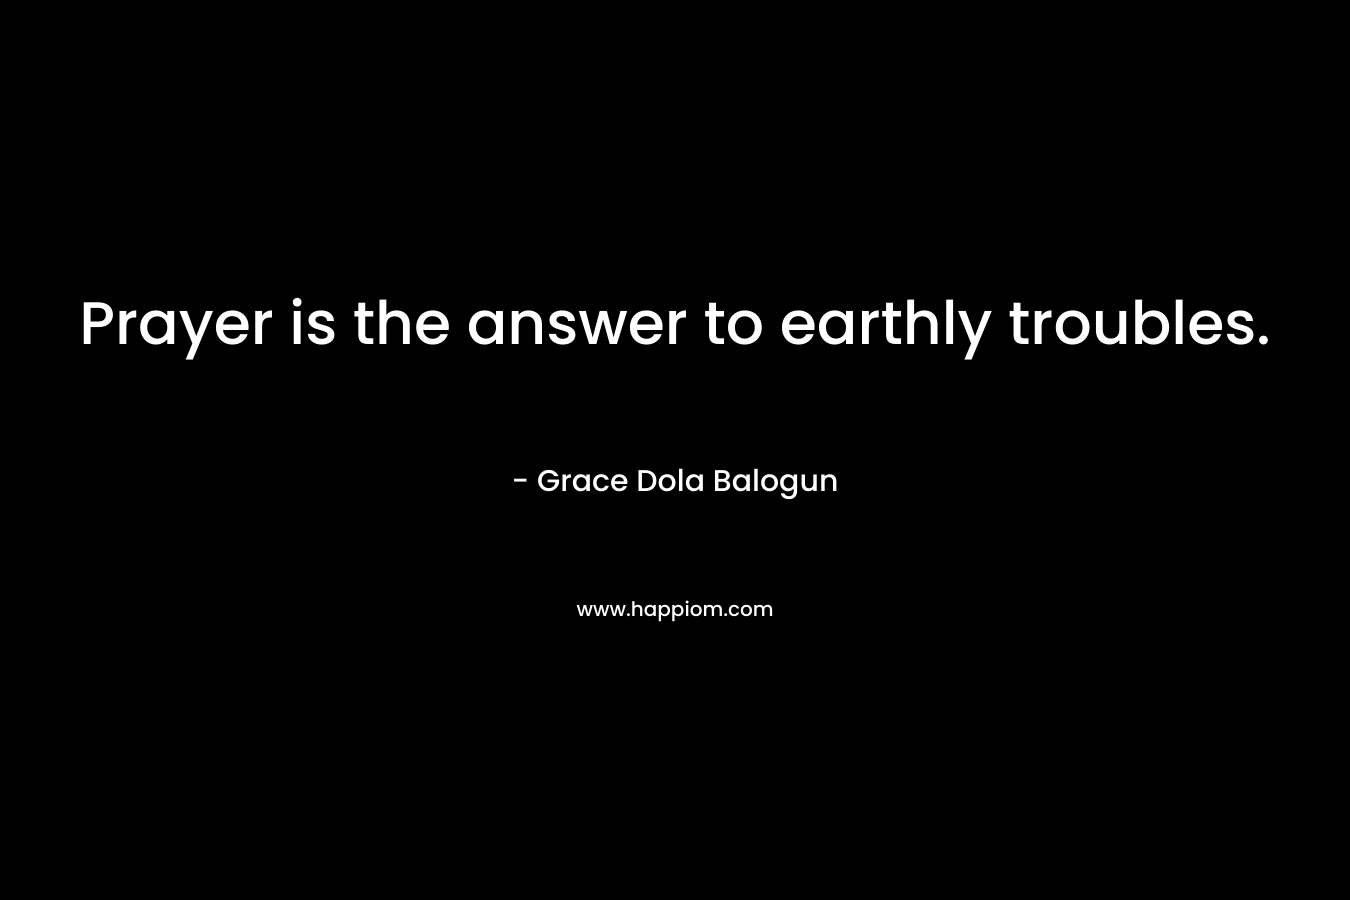 Prayer is the answer to earthly troubles.